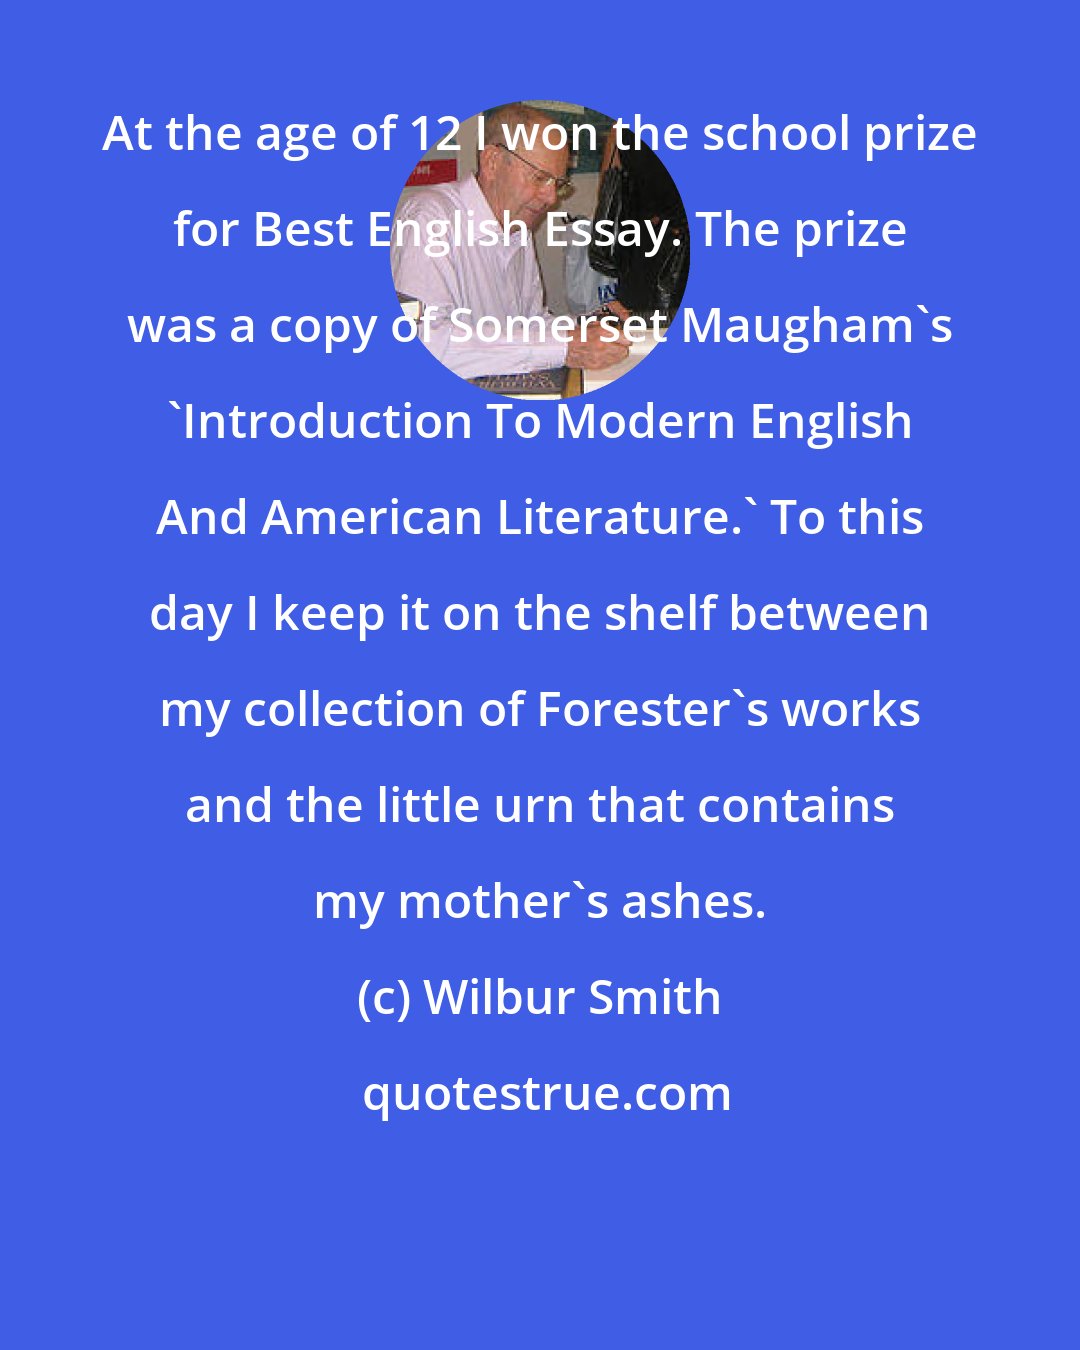 Wilbur Smith: At the age of 12 I won the school prize for Best English Essay. The prize was a copy of Somerset Maugham's 'Introduction To Modern English And American Literature.' To this day I keep it on the shelf between my collection of Forester's works and the little urn that contains my mother's ashes.